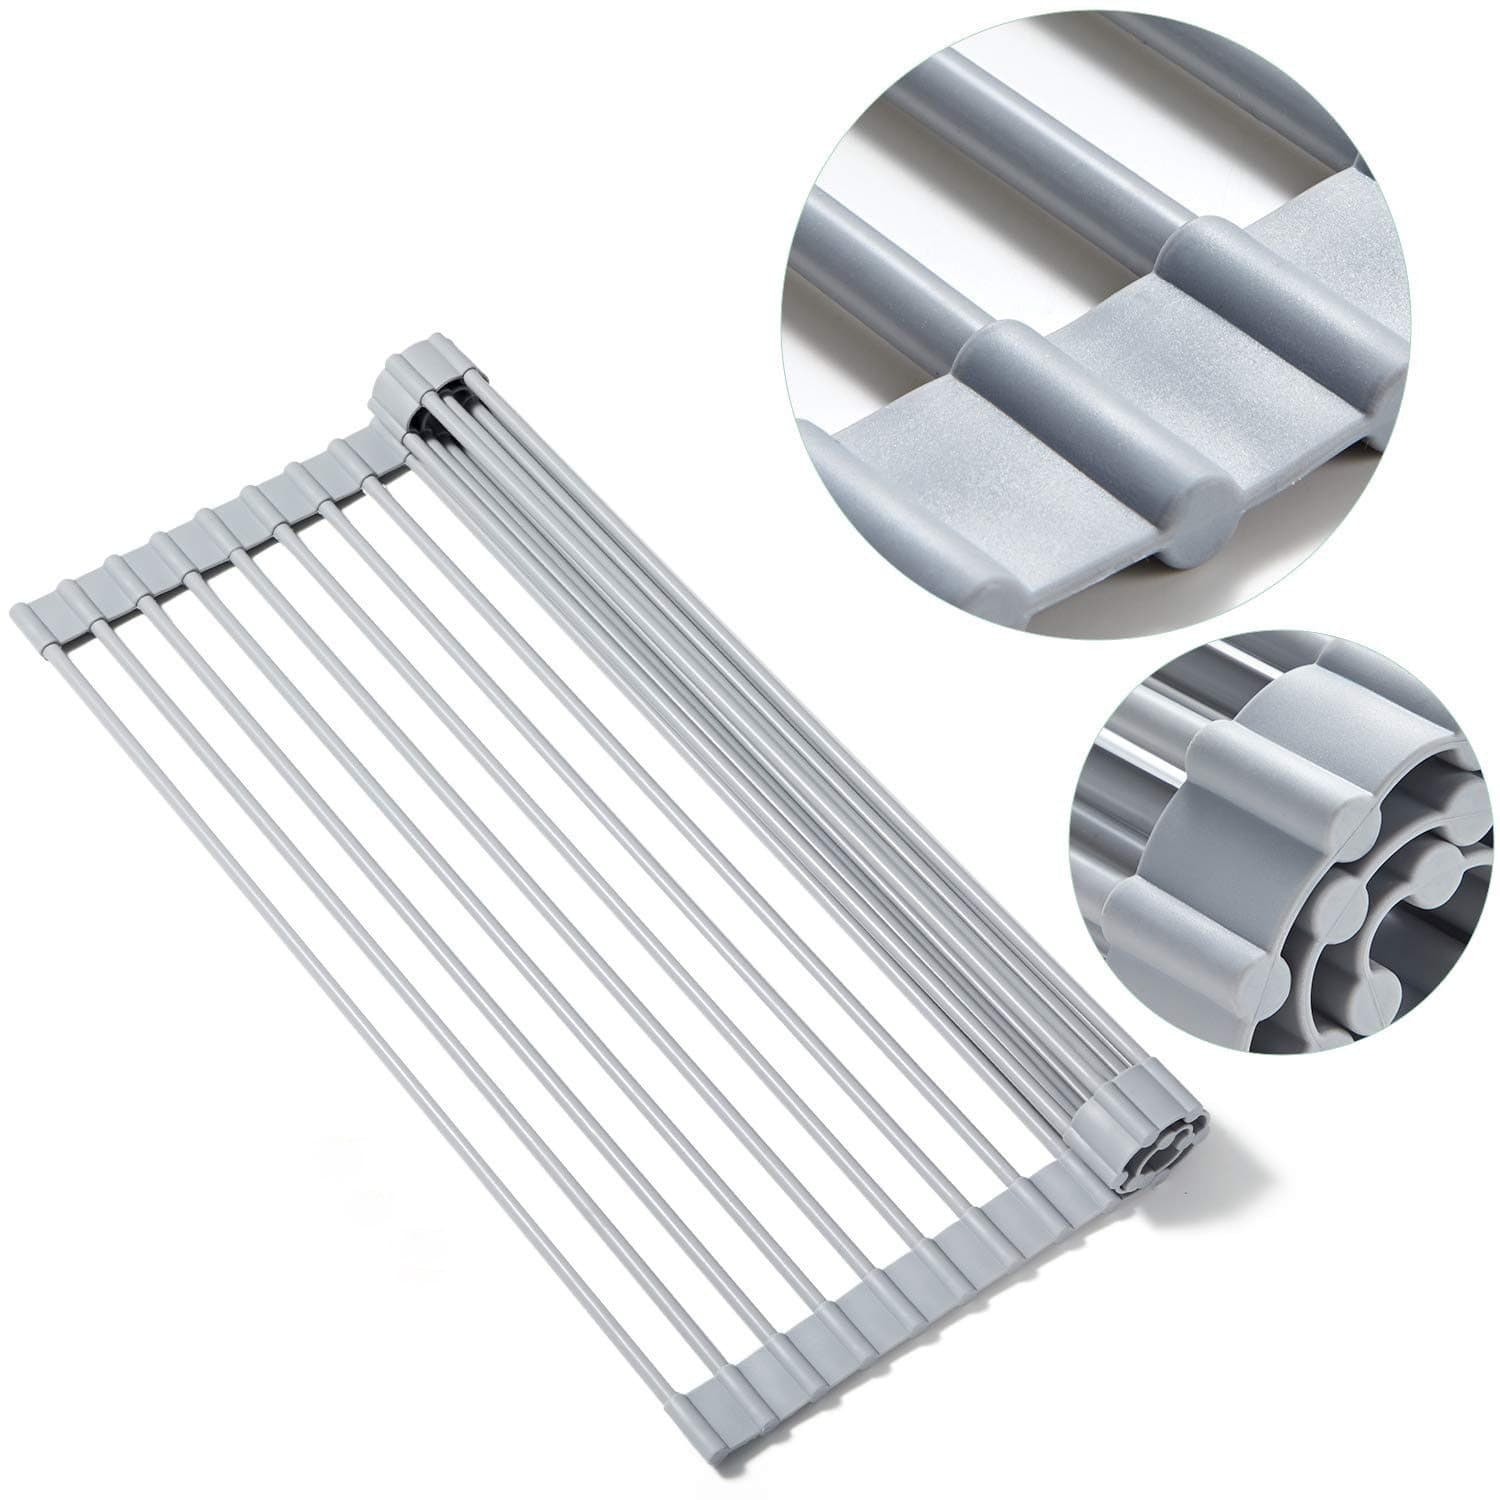 Multipurpose Roll-up Drying Rack Foldable Dish Rack Multifunctional  Foldable Drying Rack Portable Over The Sink Dish Drying Rack Roll up Dish  Drying Rack - China Multipurpose Roll-up Drying Rack and Kitchen Organizer